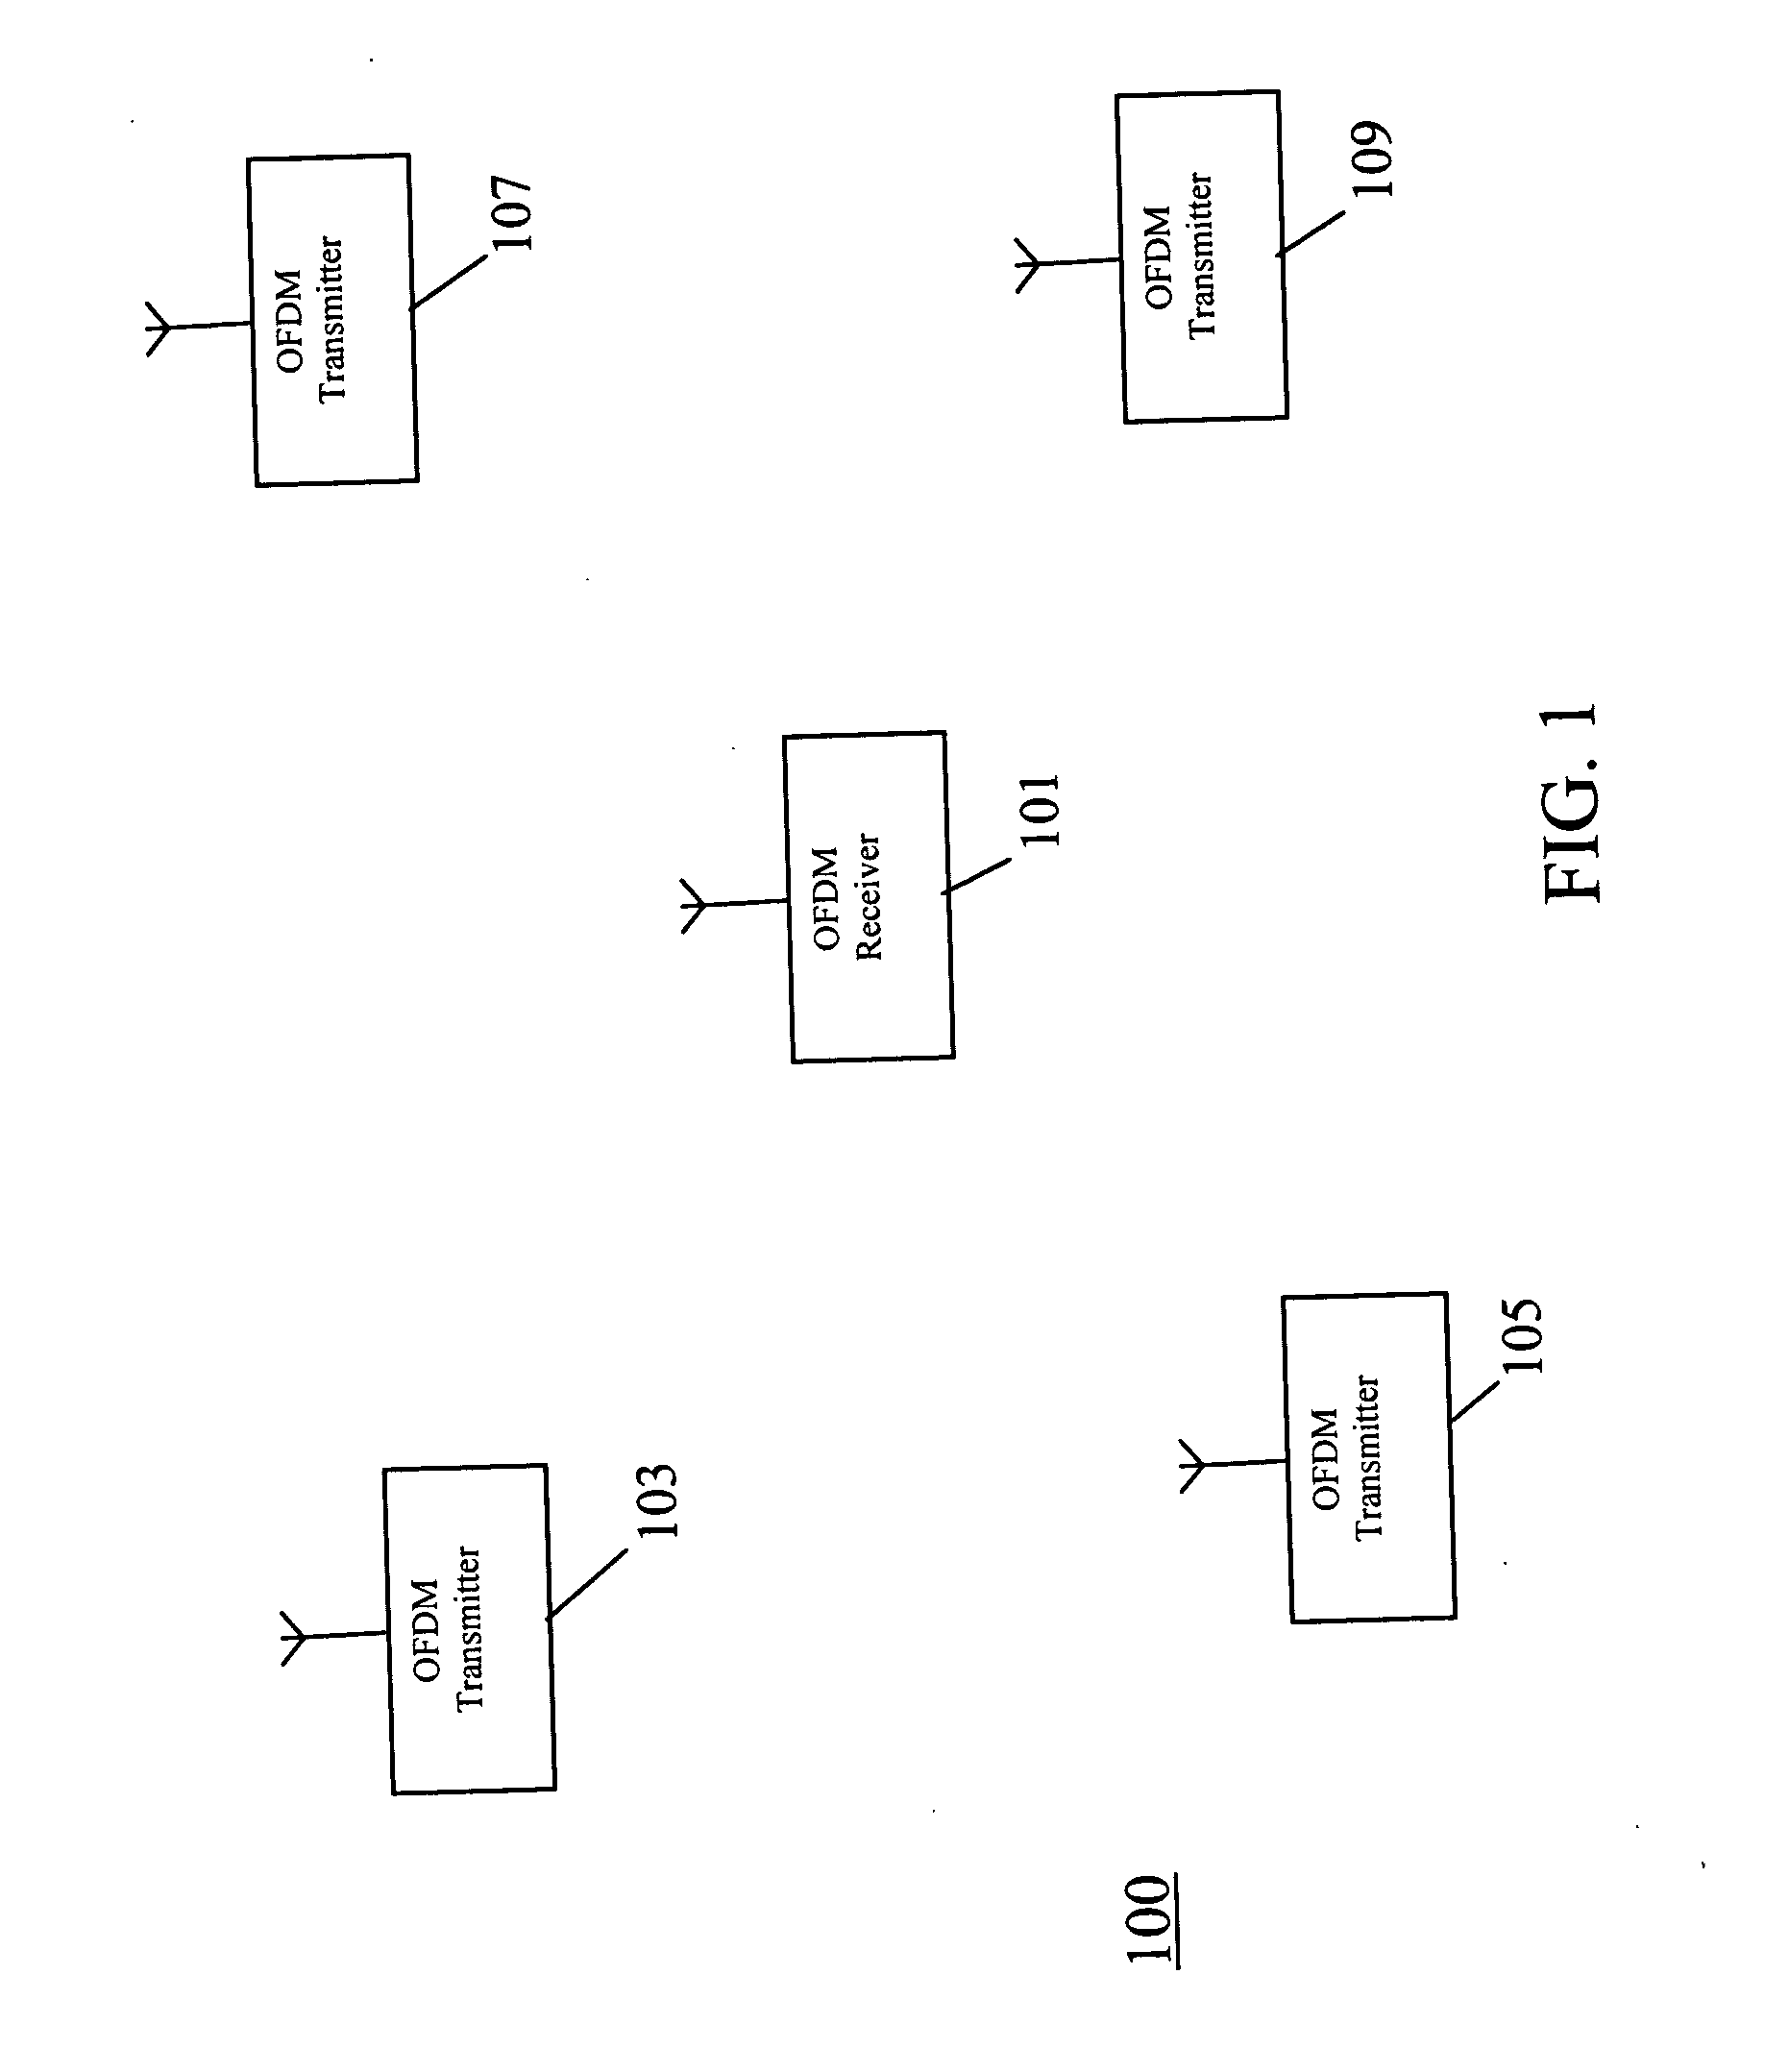 Interference mitigation for orthogonal frequency division multiplexing communication